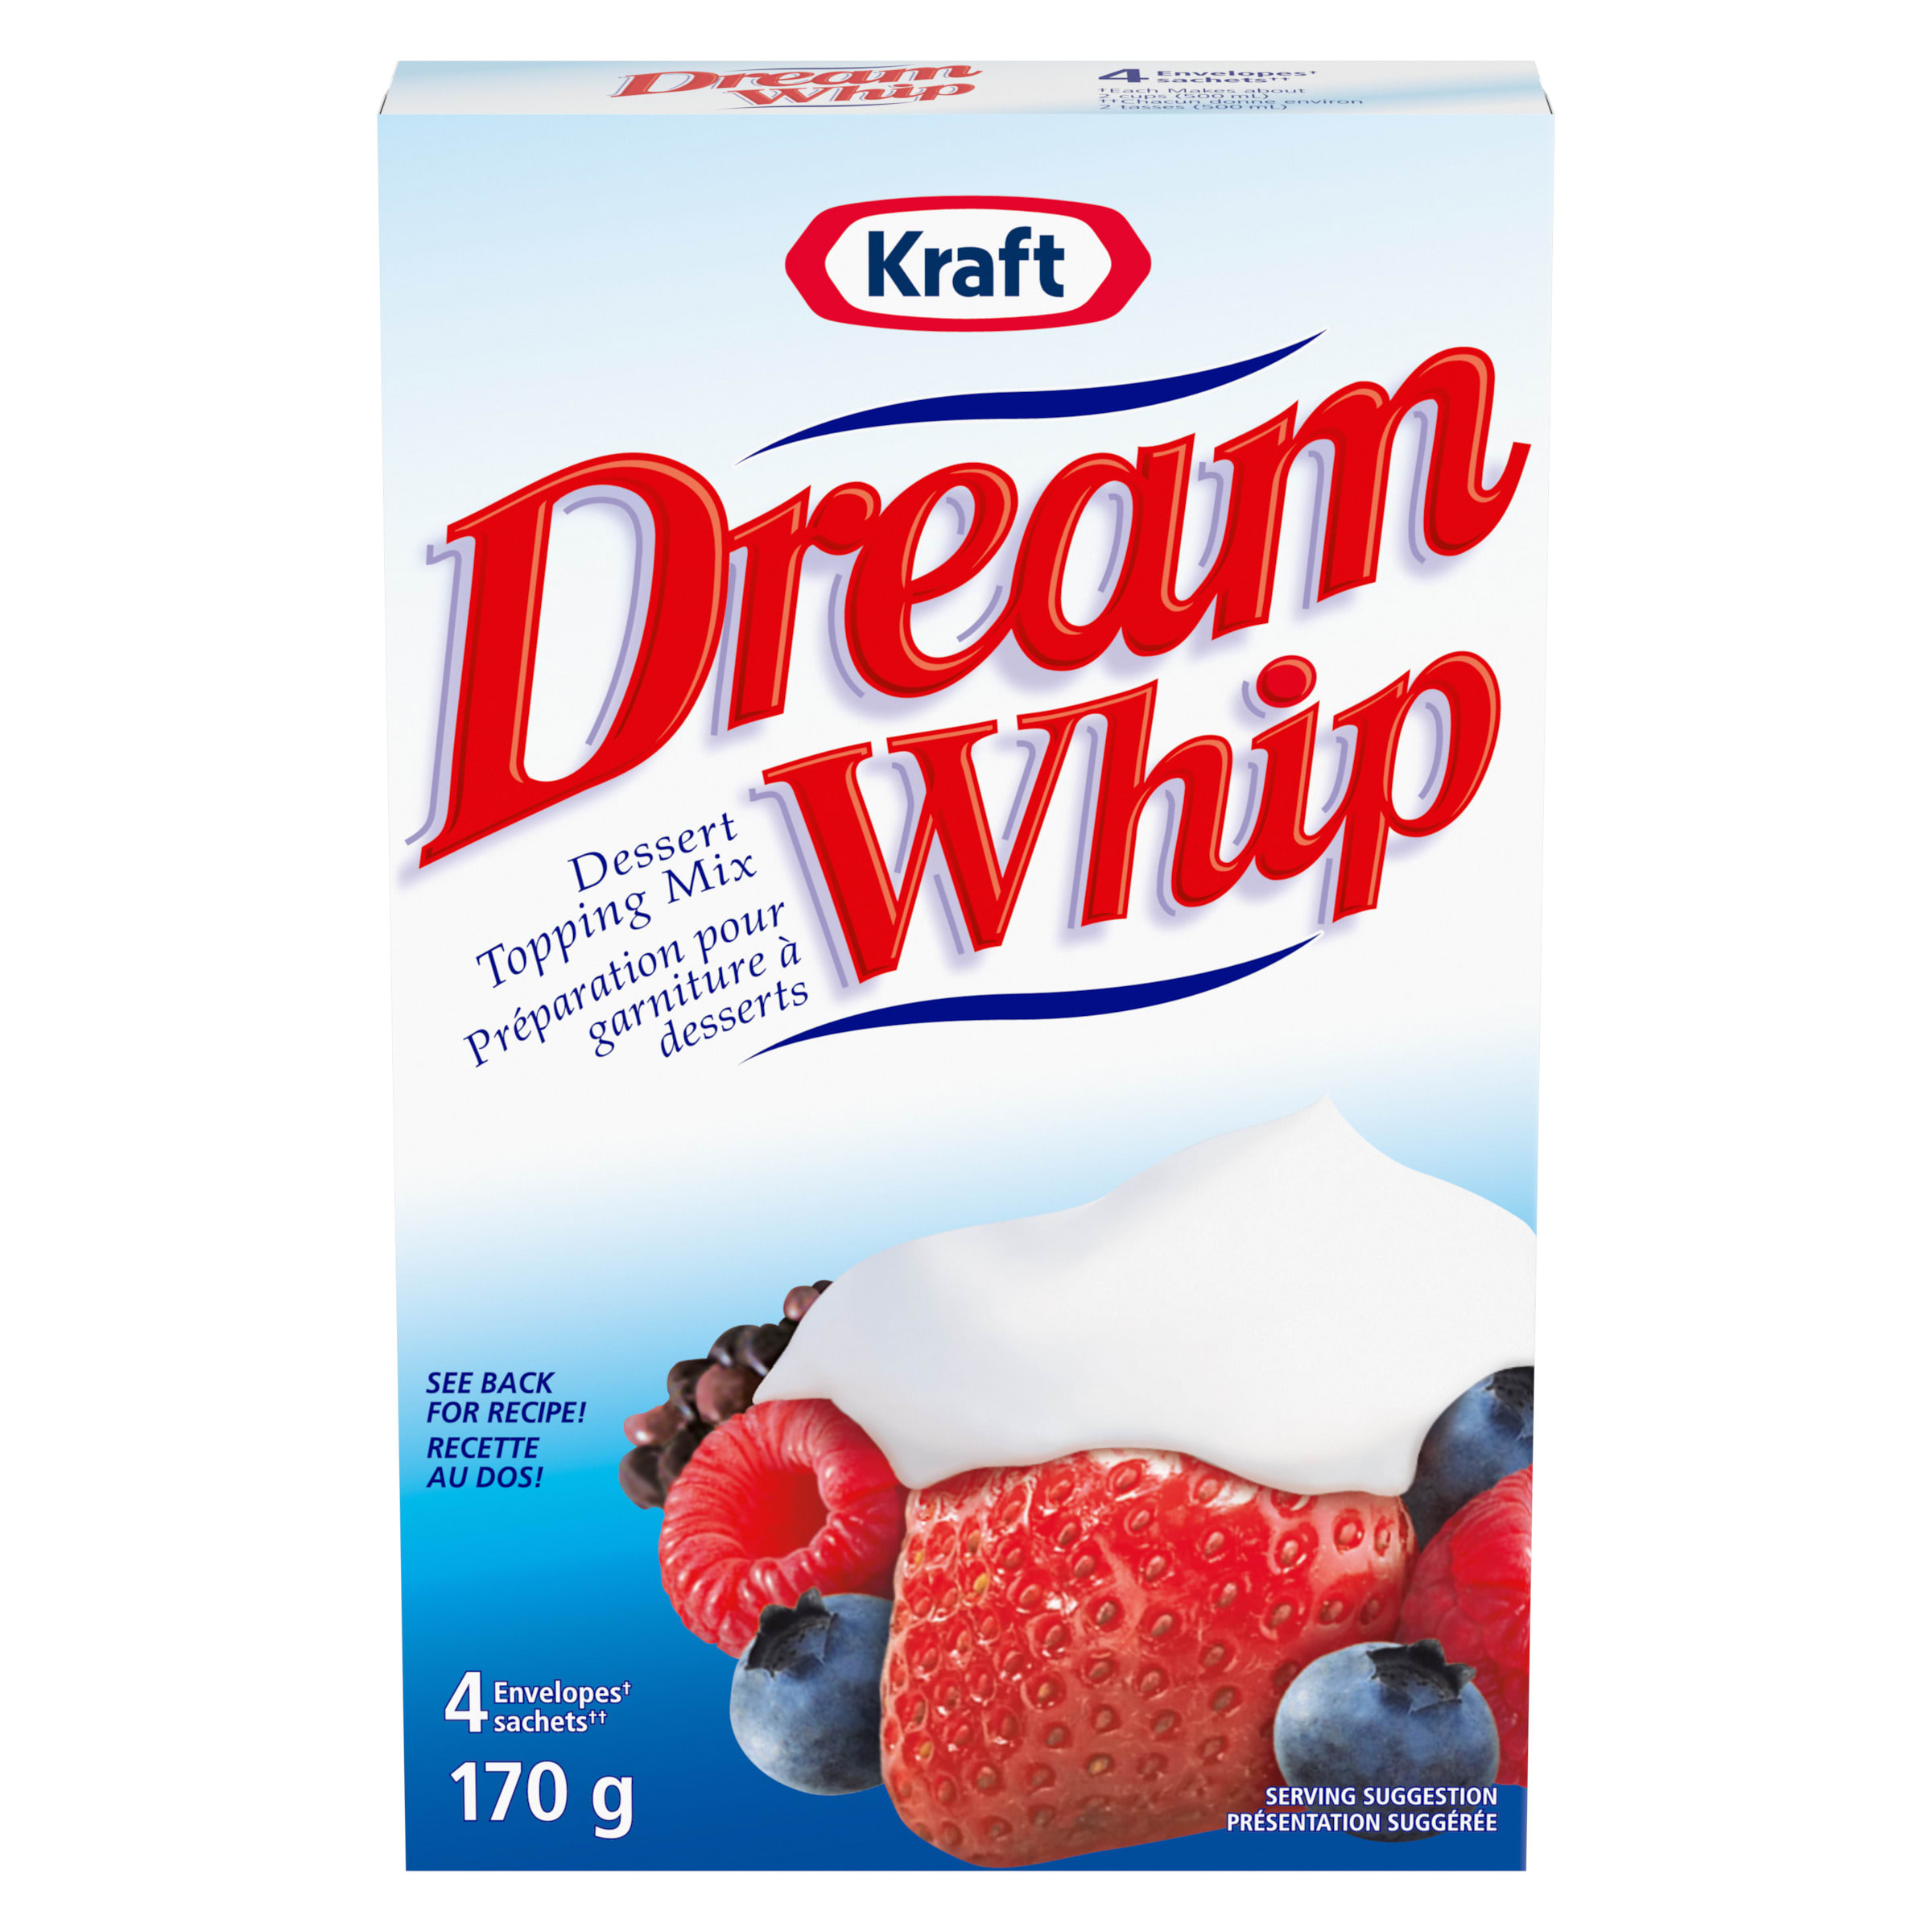 Whipped Topping Mix